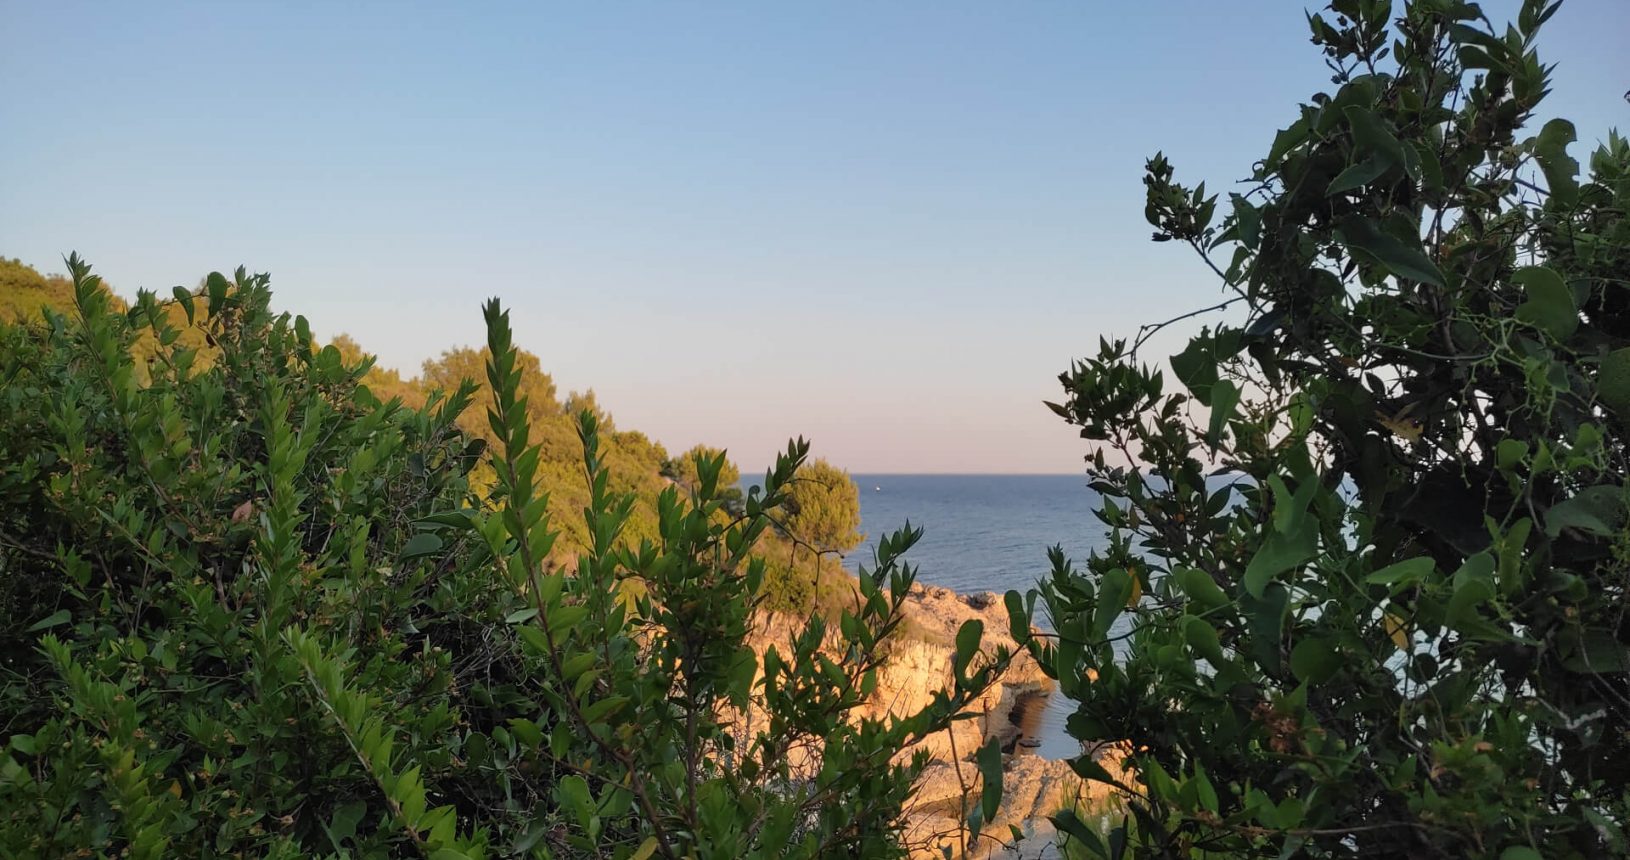 From behind the trees at Ulcinj hiking trail